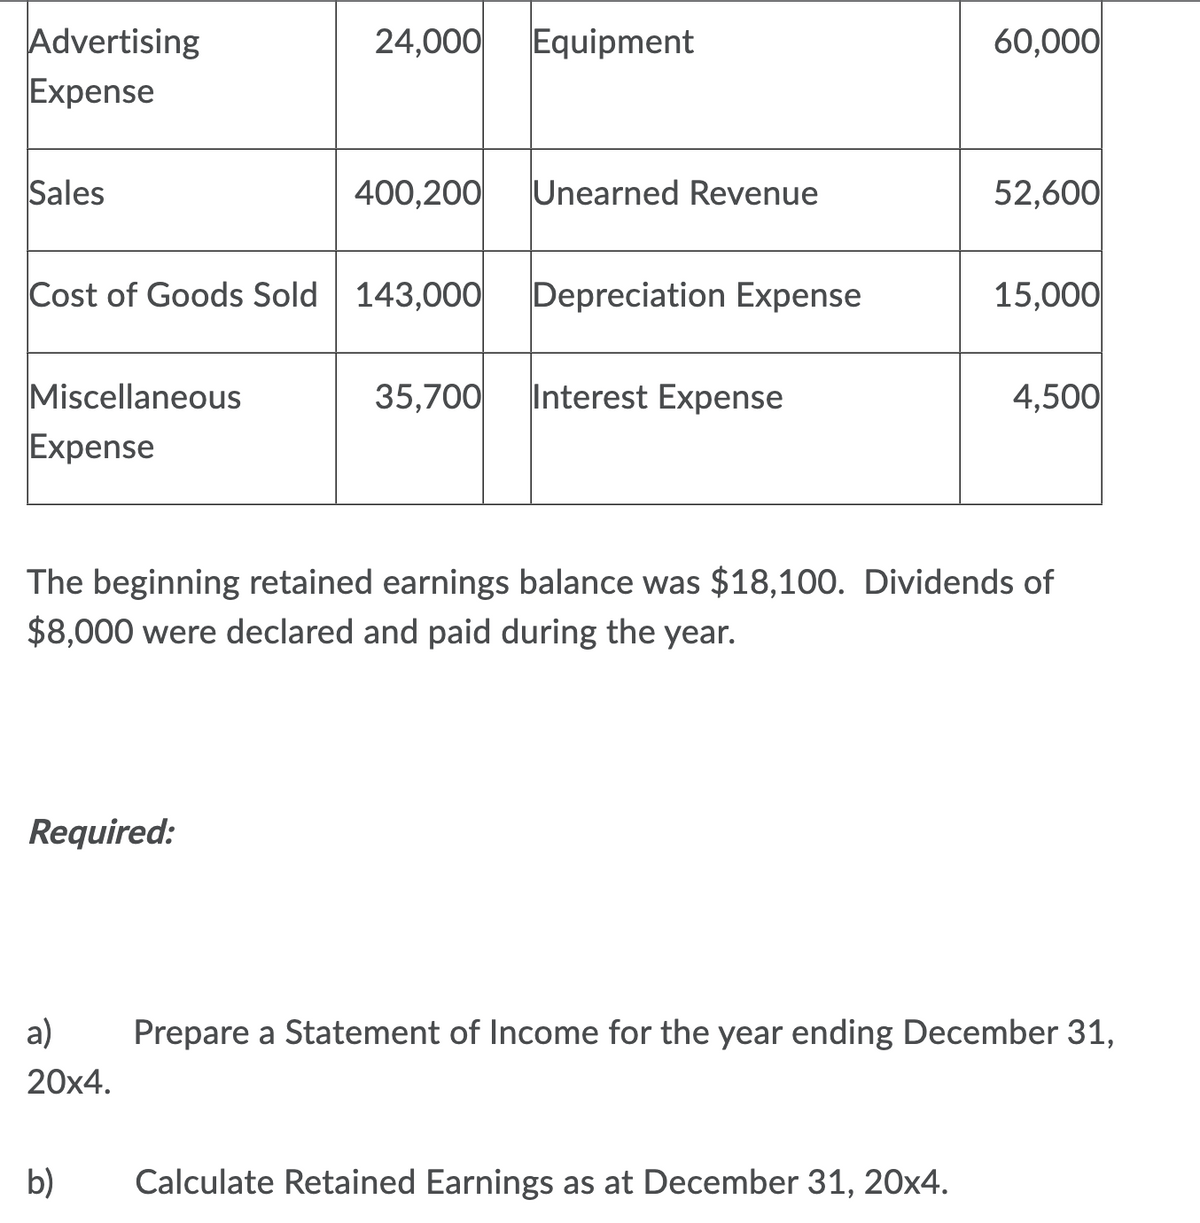 24,000
Advertising
Expense
Equipment
60,000
Sales
400,200
Unearned Revenue
52,600
Cost of Goods Sold 143,000
Depreciation Expense
15,000
Miscellaneous
Expense
35,700
Interest Expense
4,500
The beginning retained earnings balance was $18,100. Dividends of
$8,000 were declared and paid during the year.
Required:
a)
Prepare a Statement of Income for the year ending December 31,
20x4.
b)
Calculate Retained Earnings as at December 31, 20x4.
